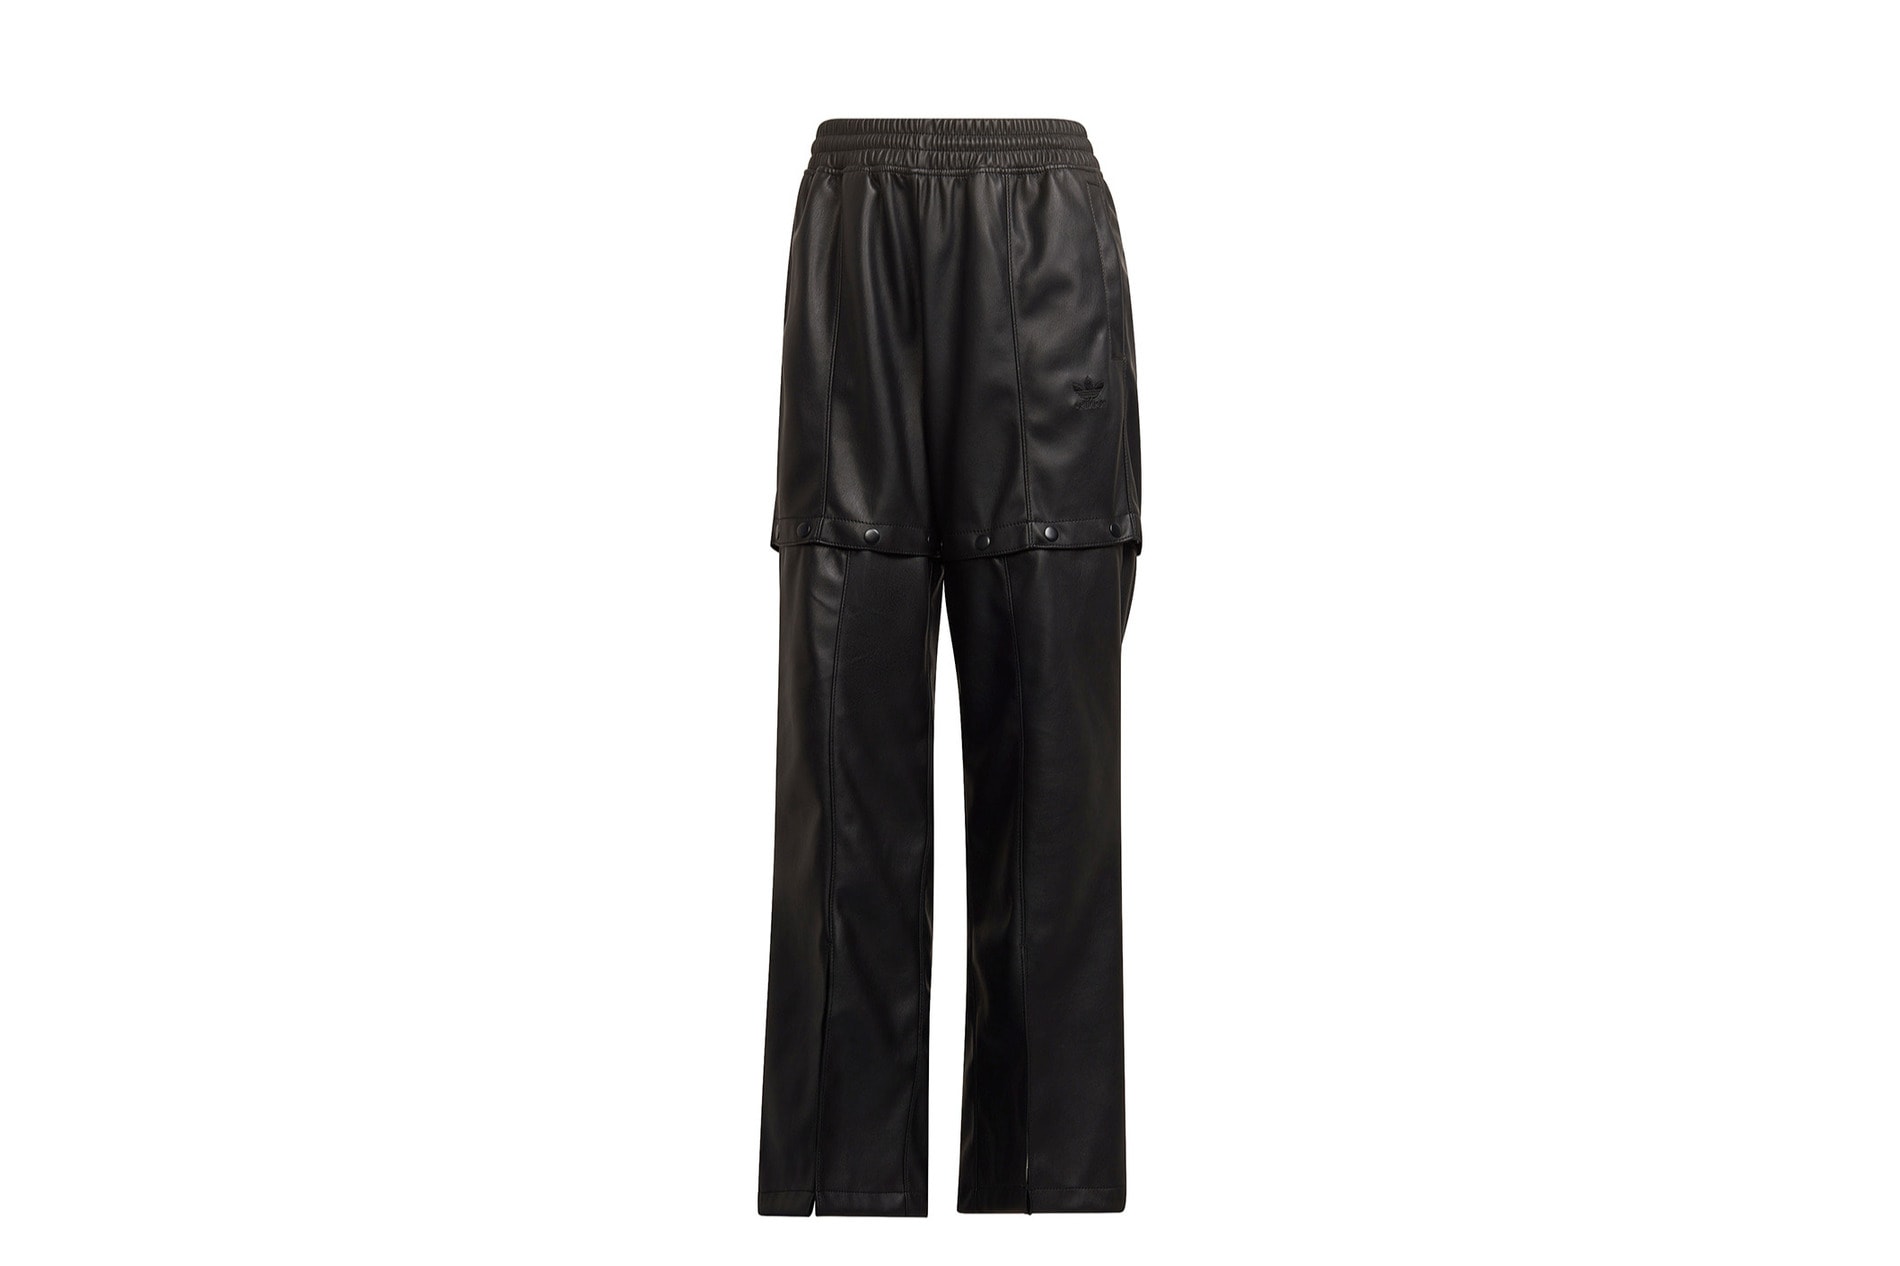 adidas Originals Womens Always Original Faux Leather Track Pants Black  Small at Amazon Womens Clothing store